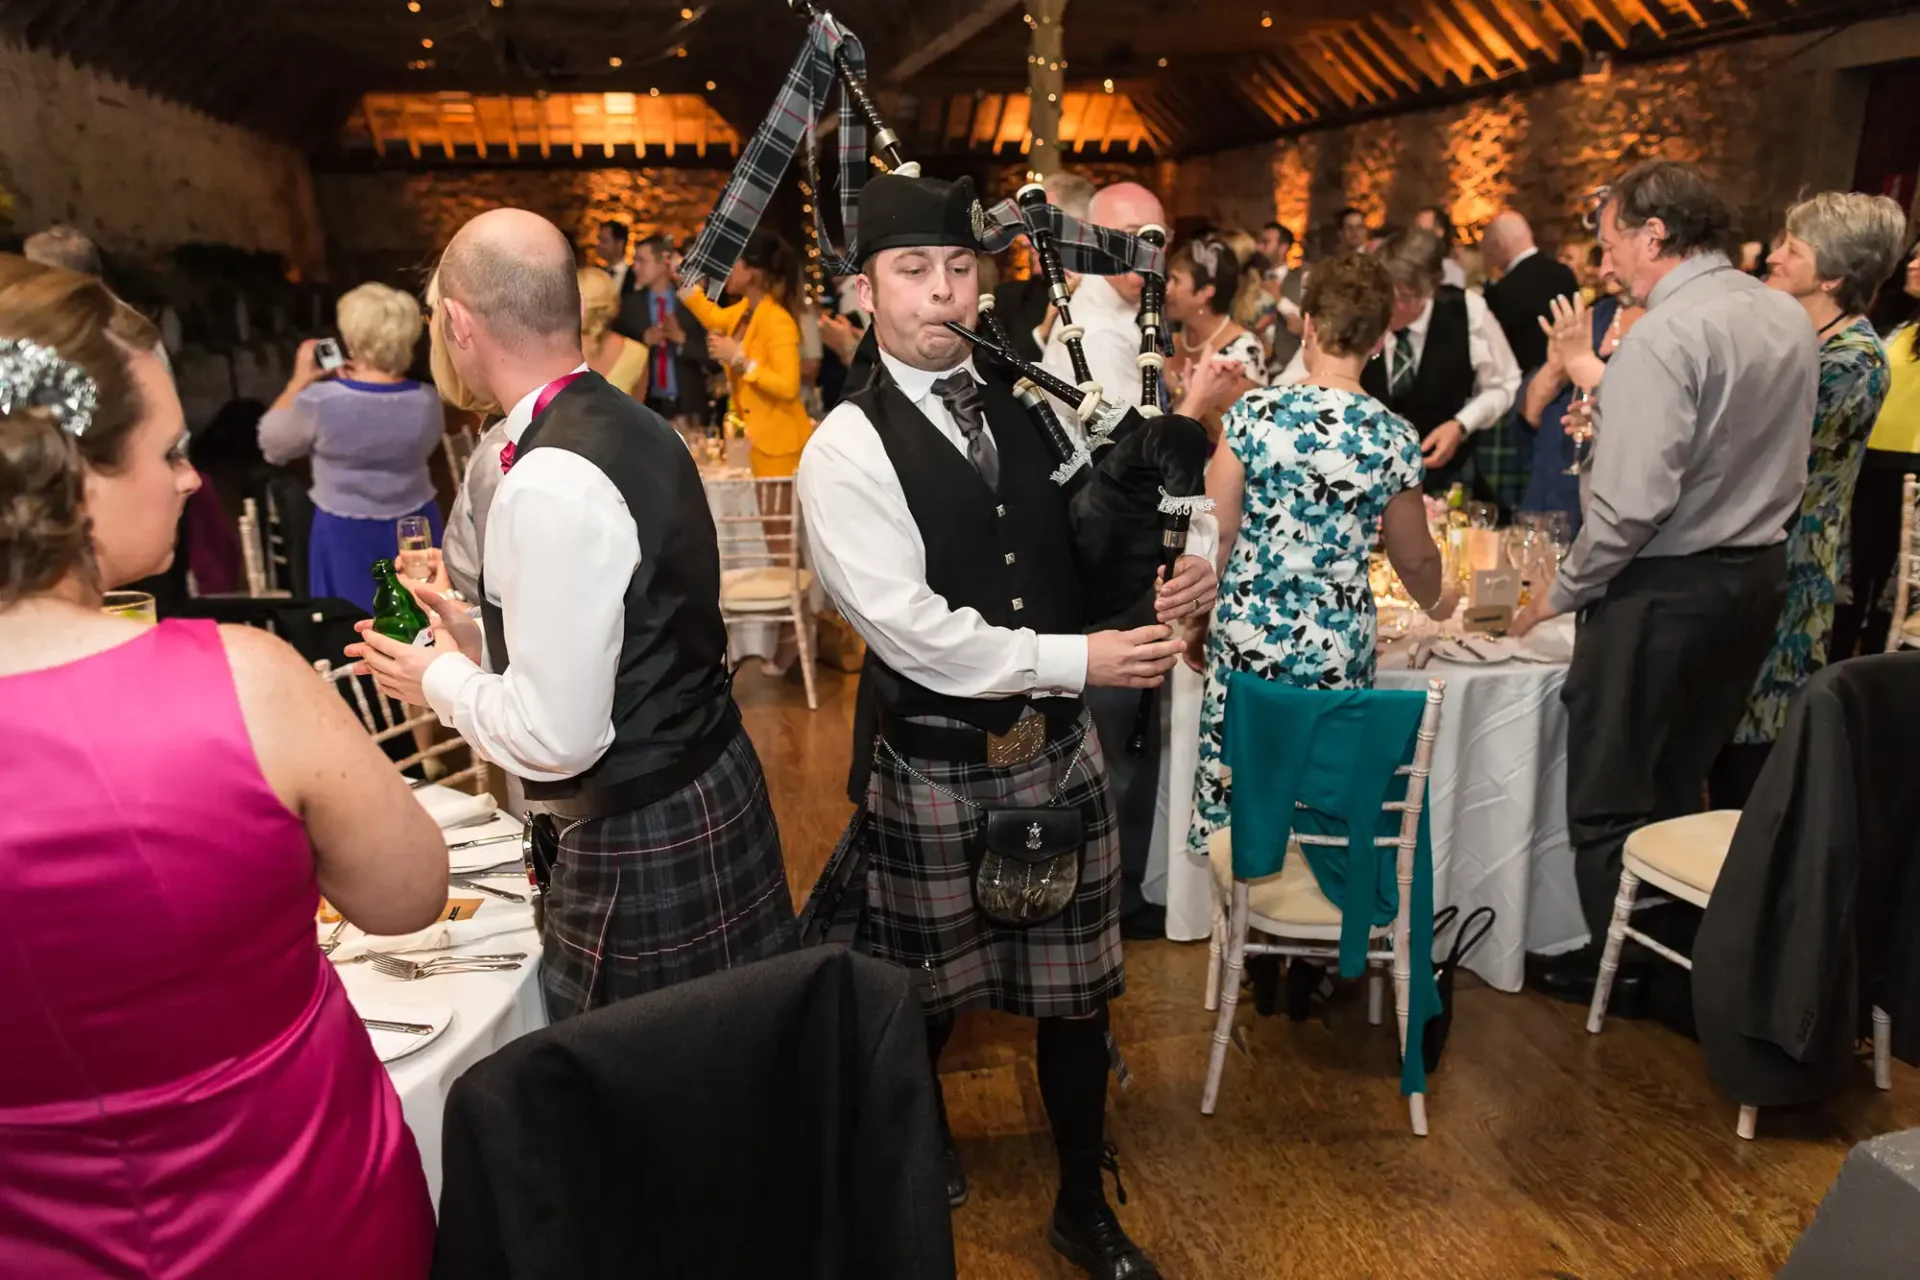 A bagpiper in traditional scottish attire performing at a lively indoor wedding reception with guests mingling around tables.